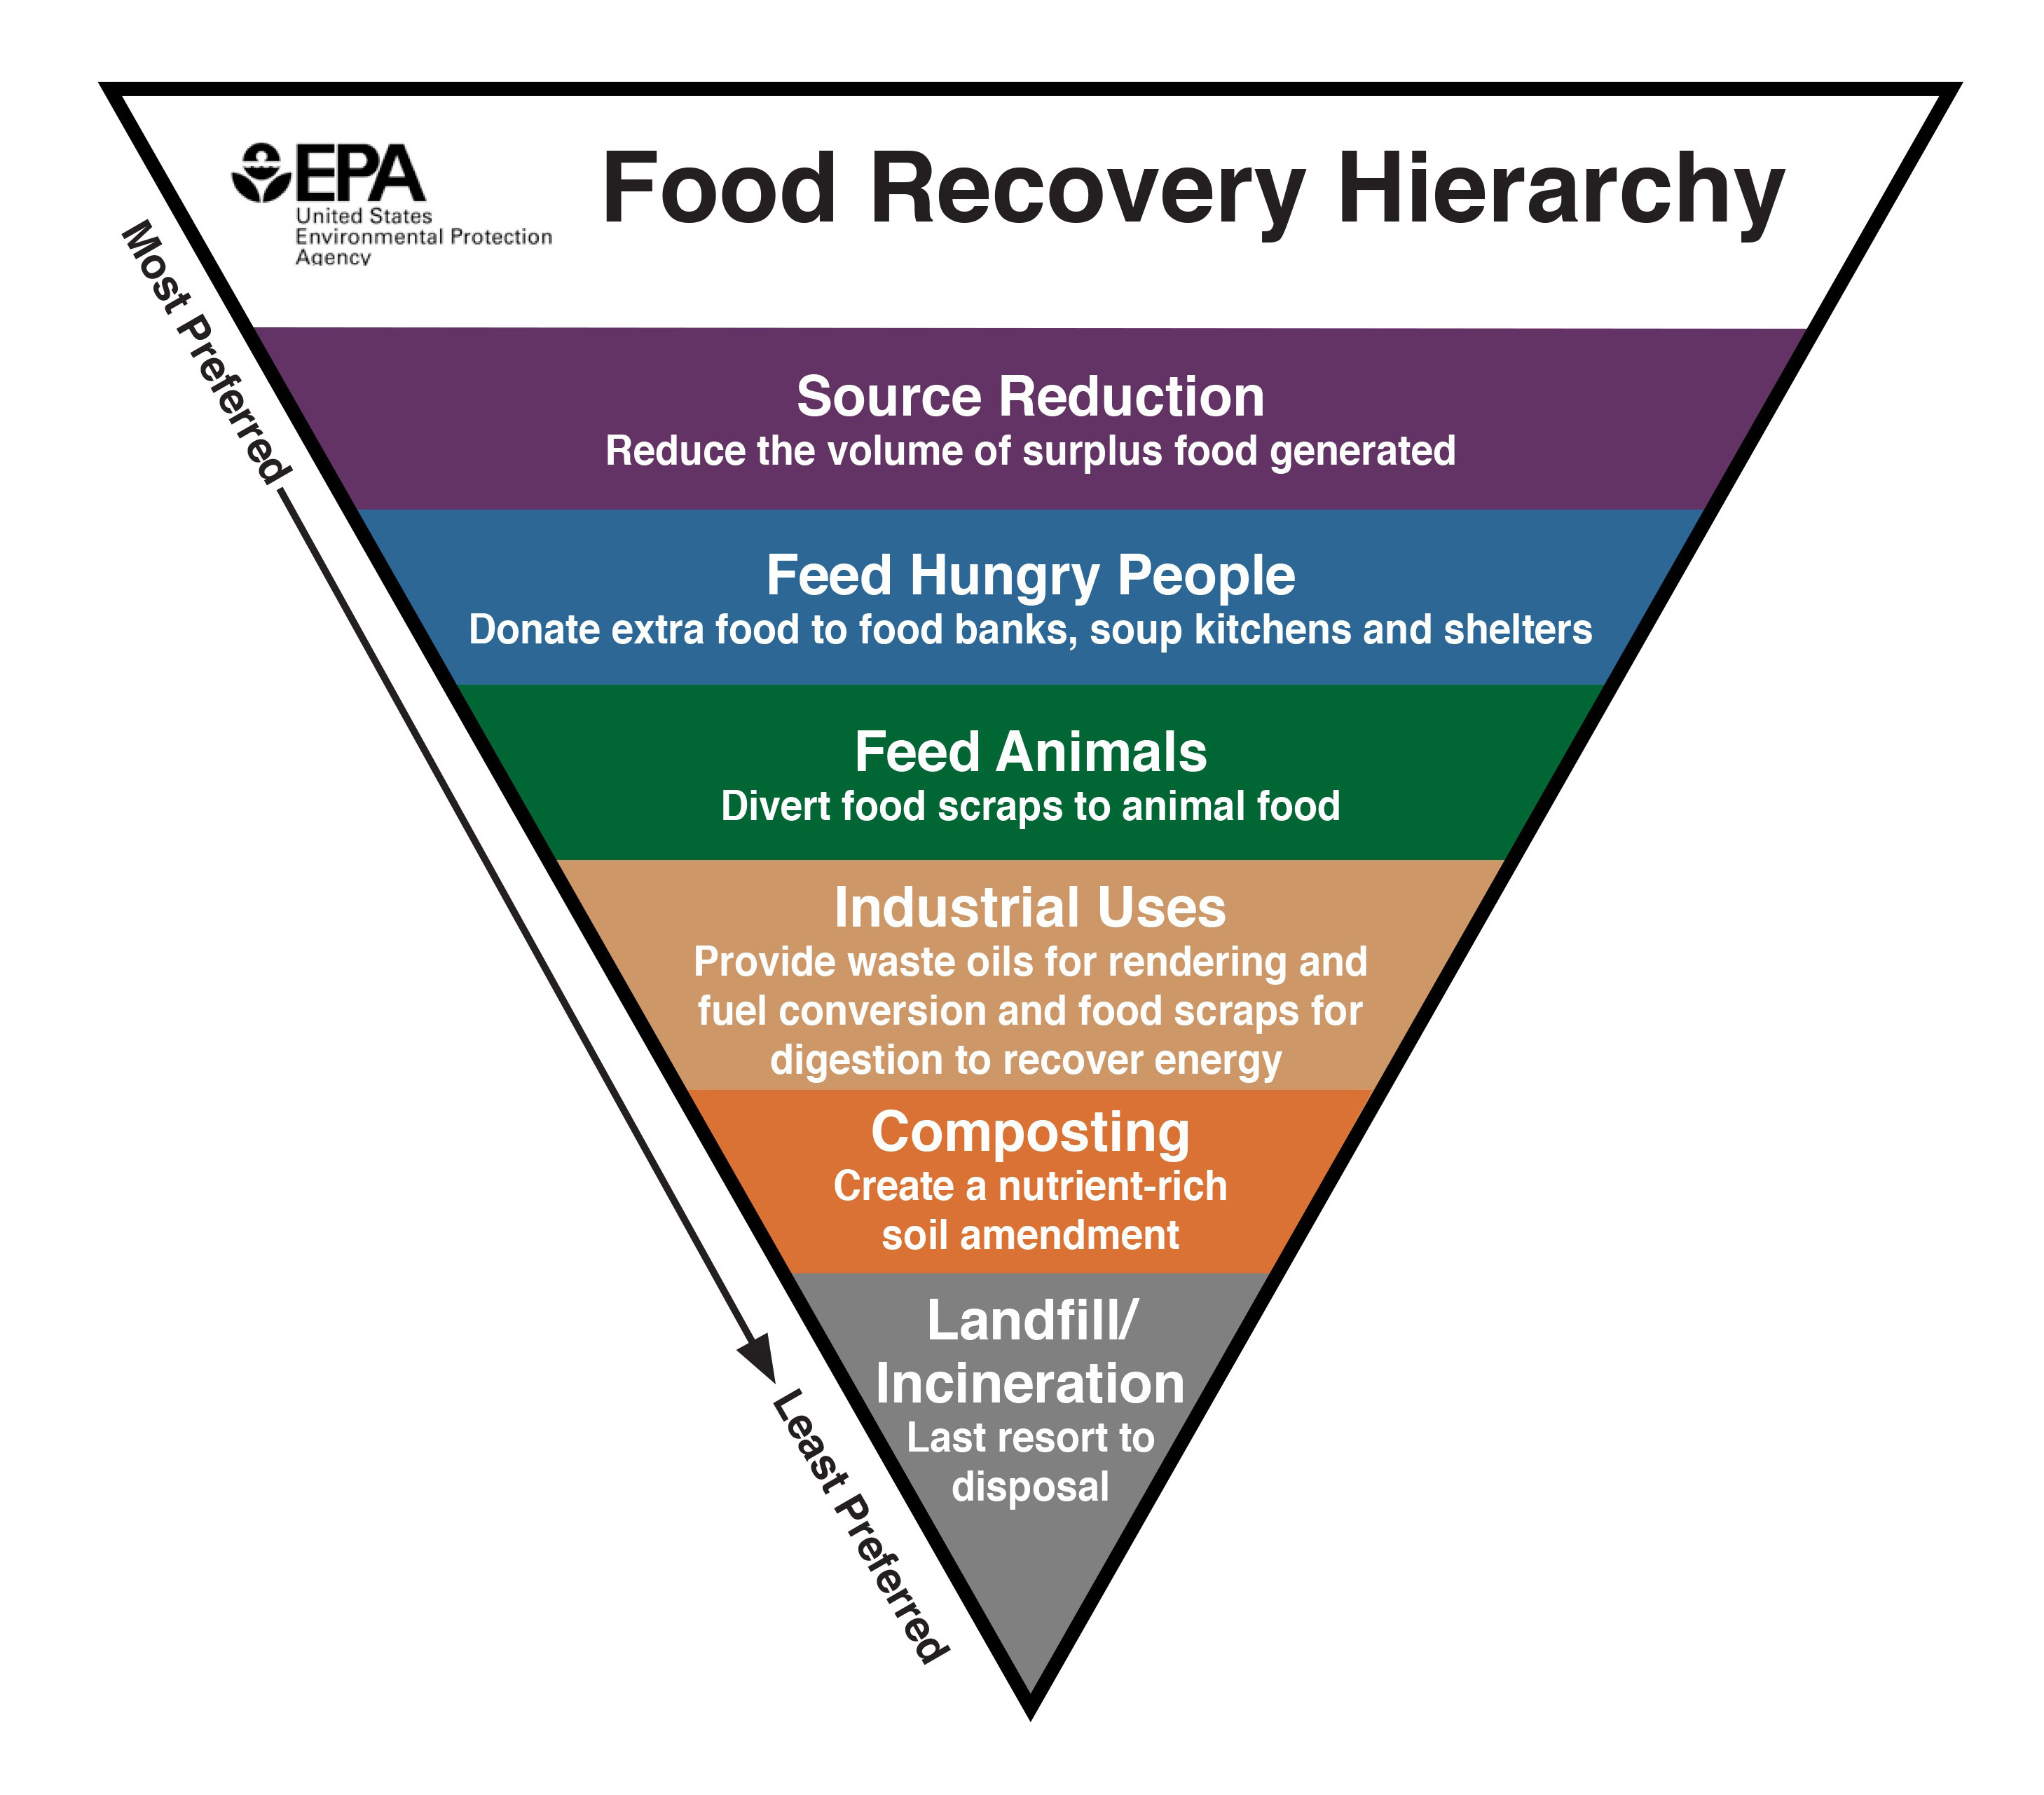 https://www.epa.gov/sites/default/files/2019-11/food_recovery_hierarchy_-_eng_high_res_v2.jpg